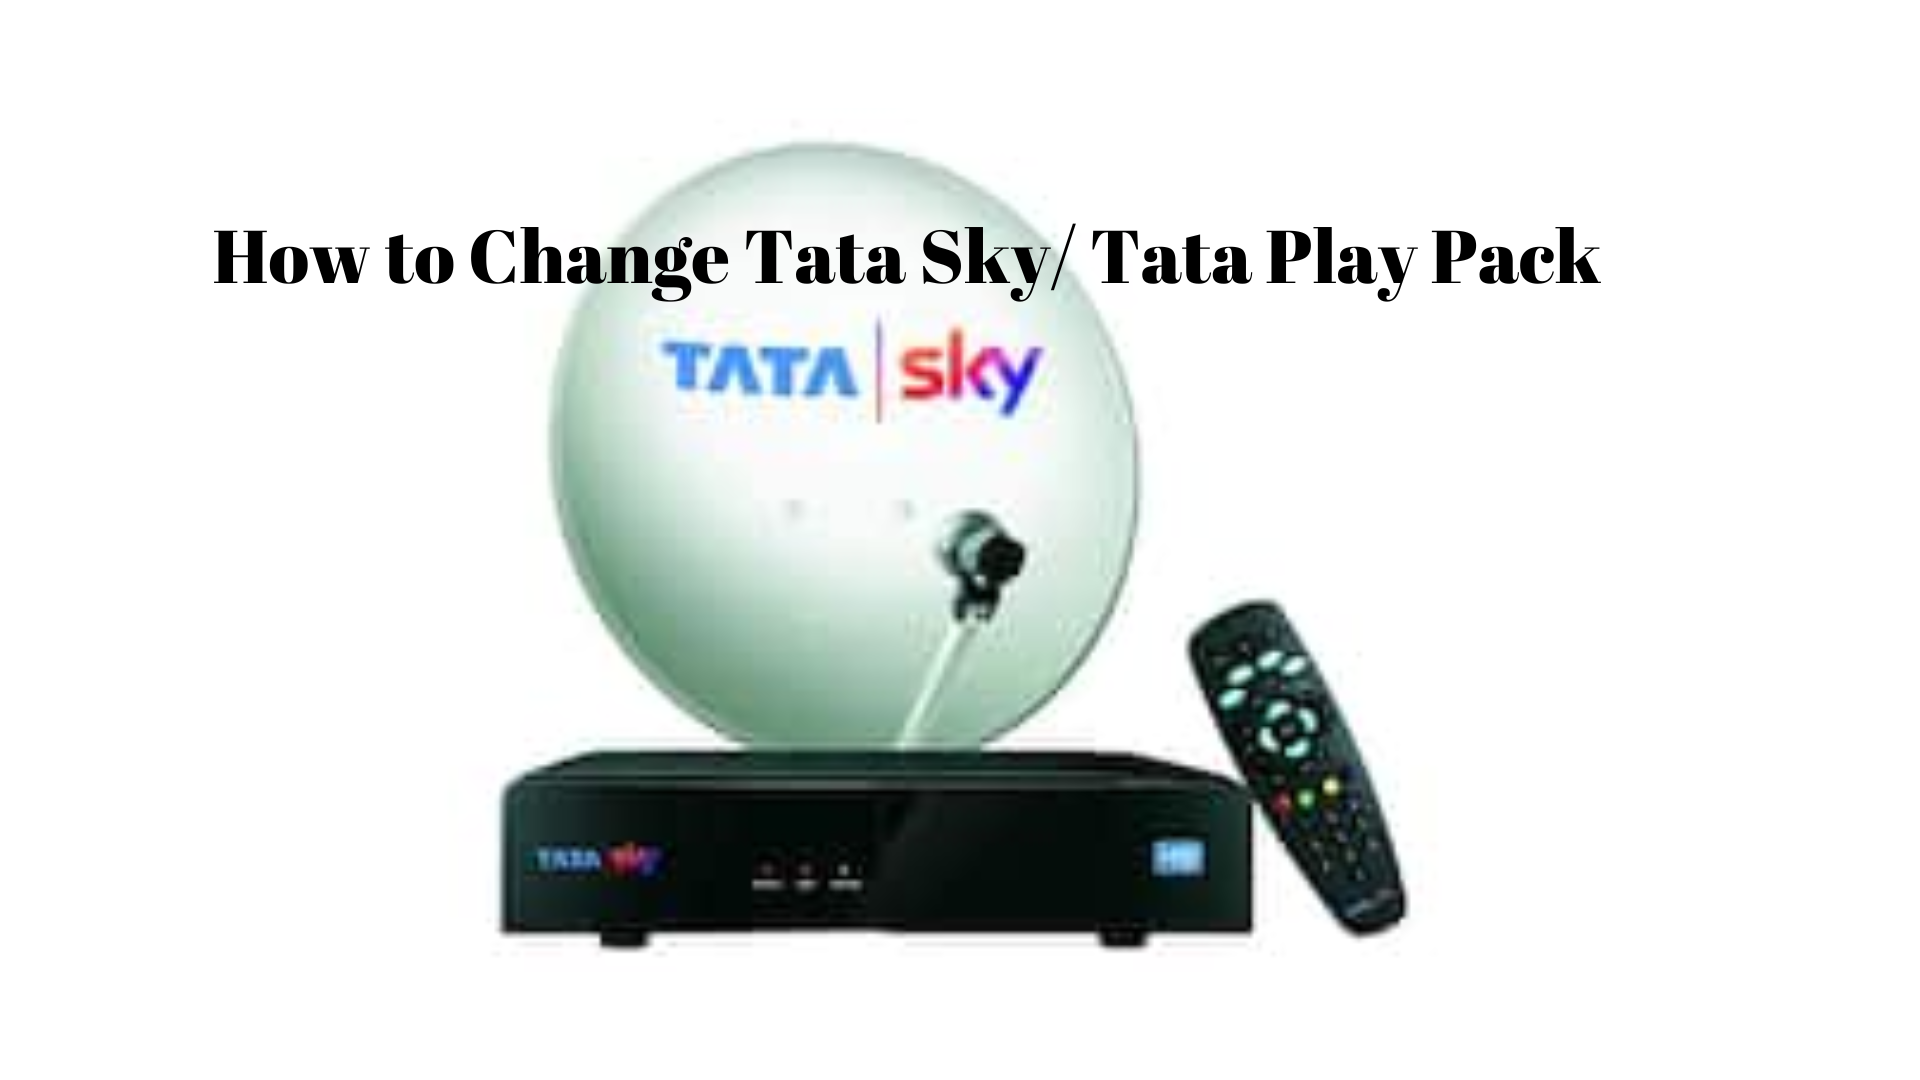 How to Change Tata Sky Pack: Step-by-Step Guide